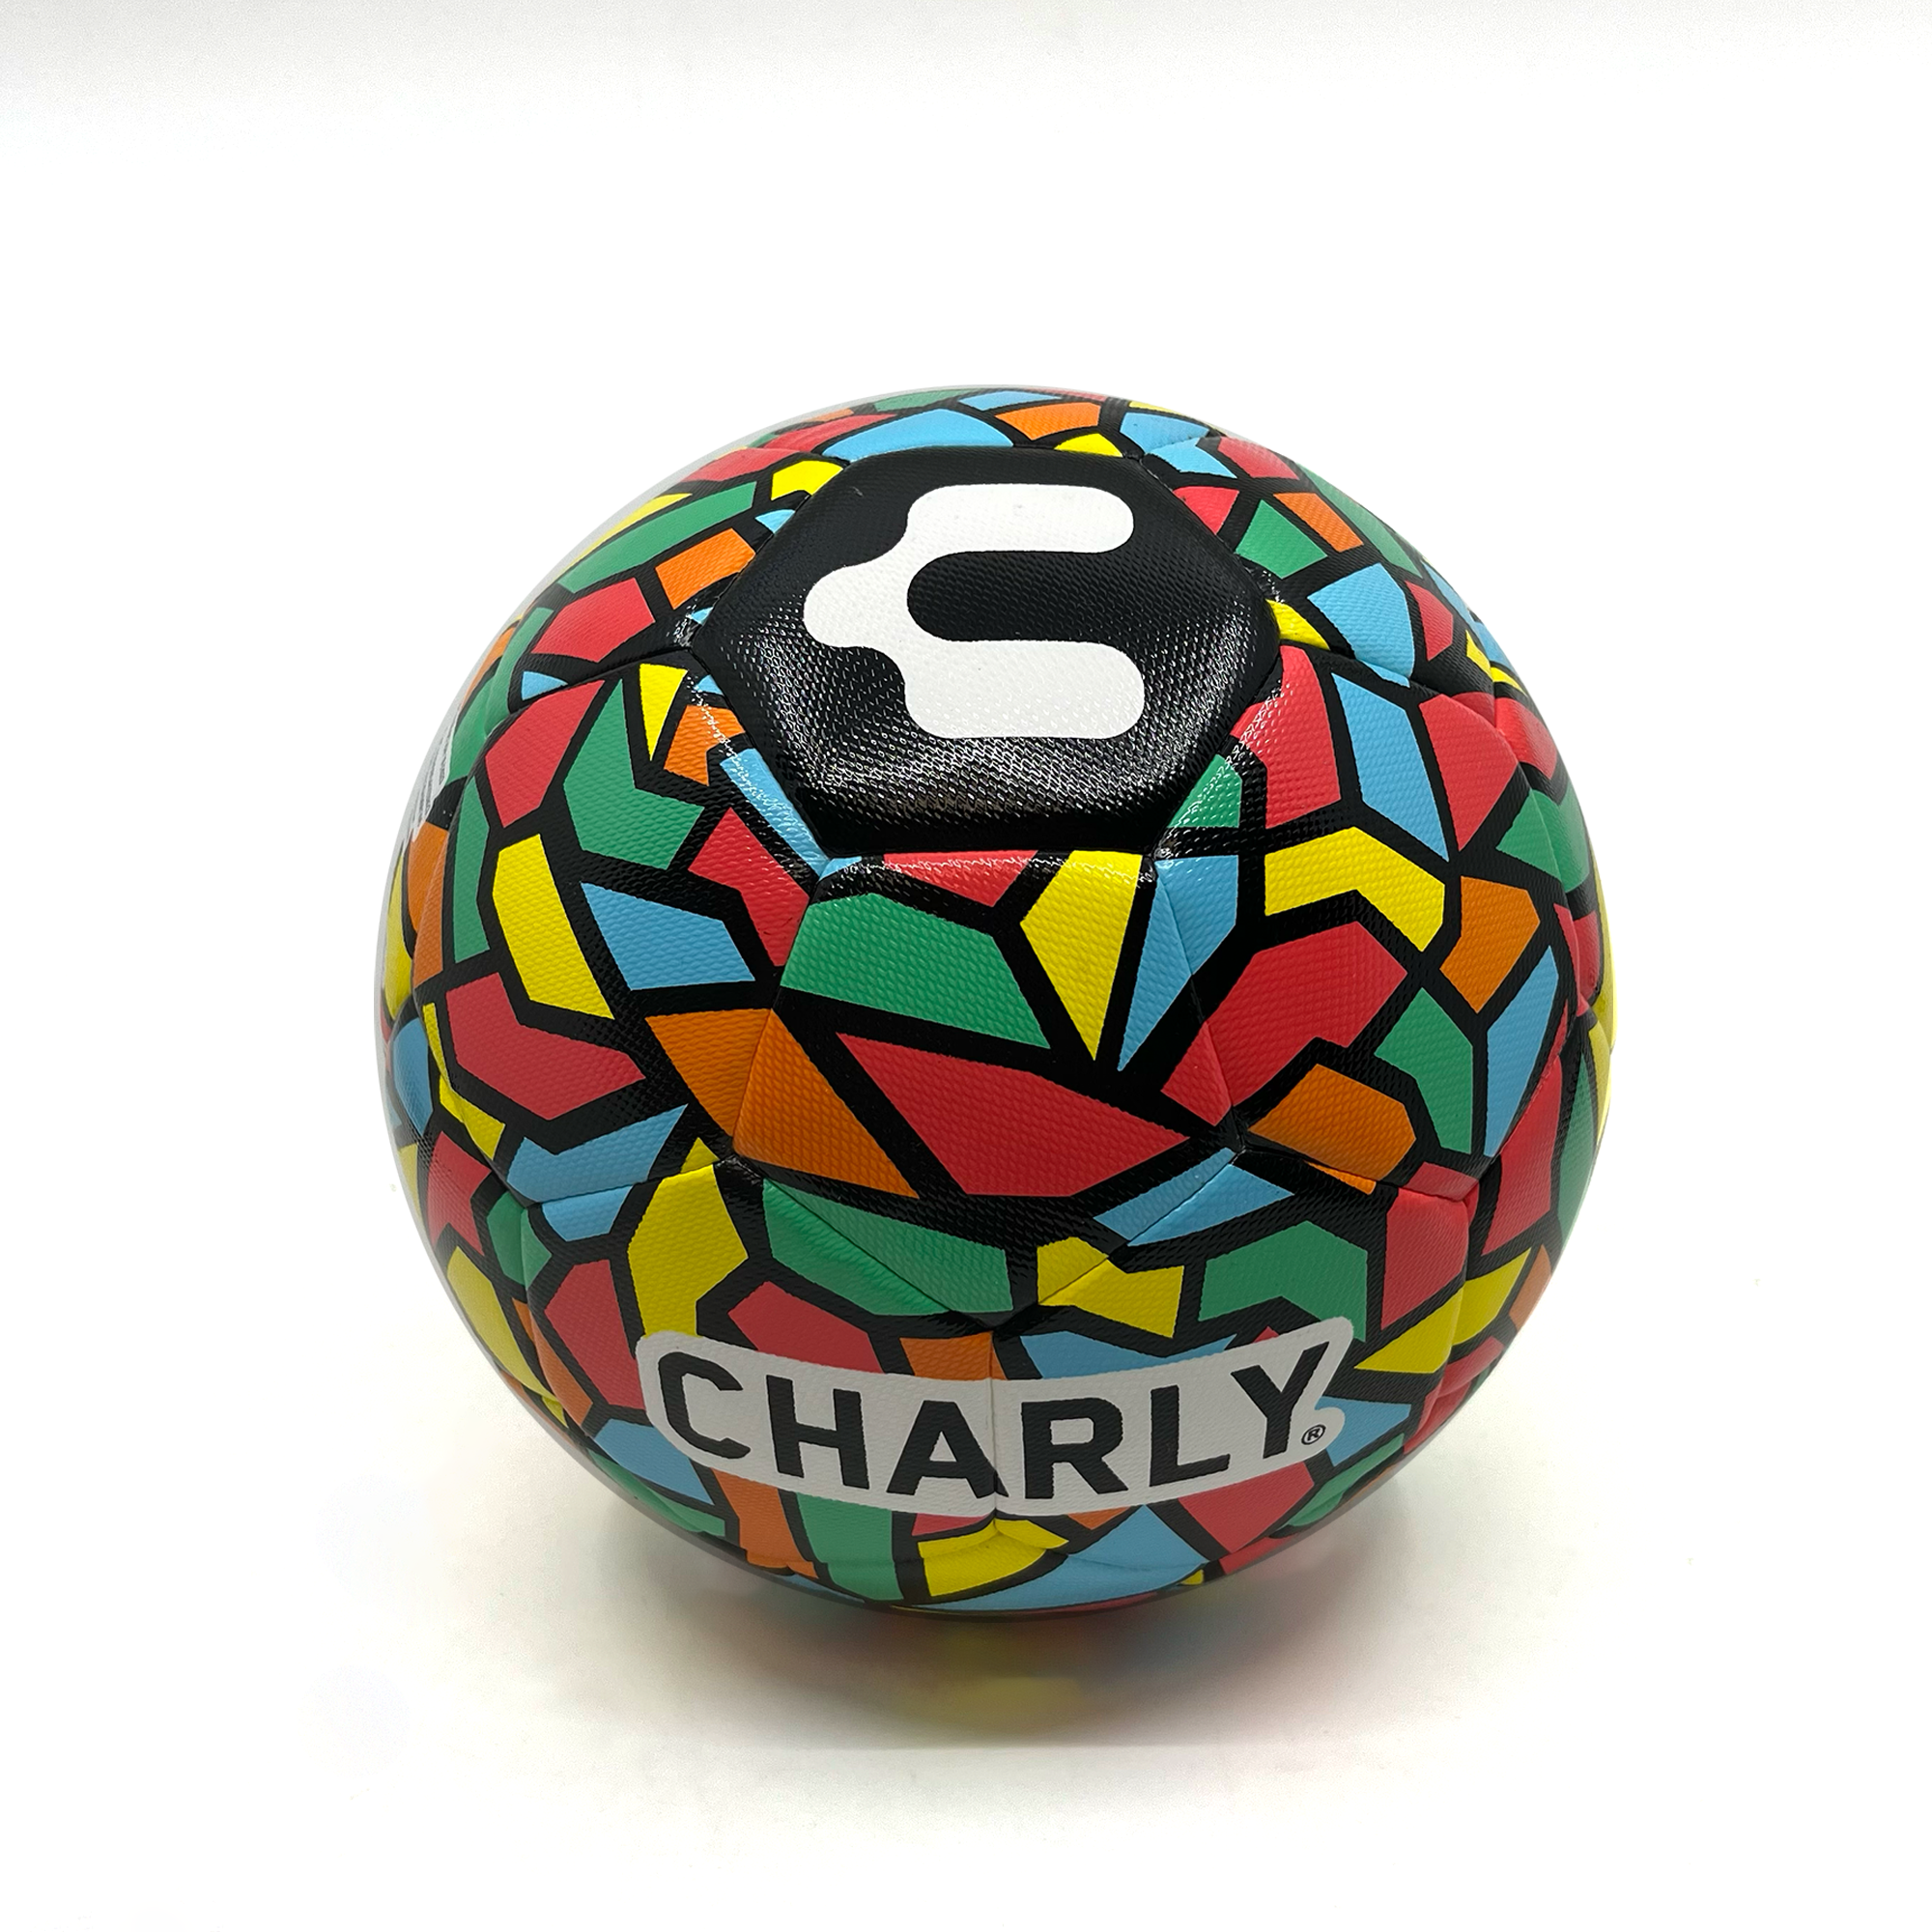 Size 5 soccer ball with Charly logo on top with Charly text on center of ball.